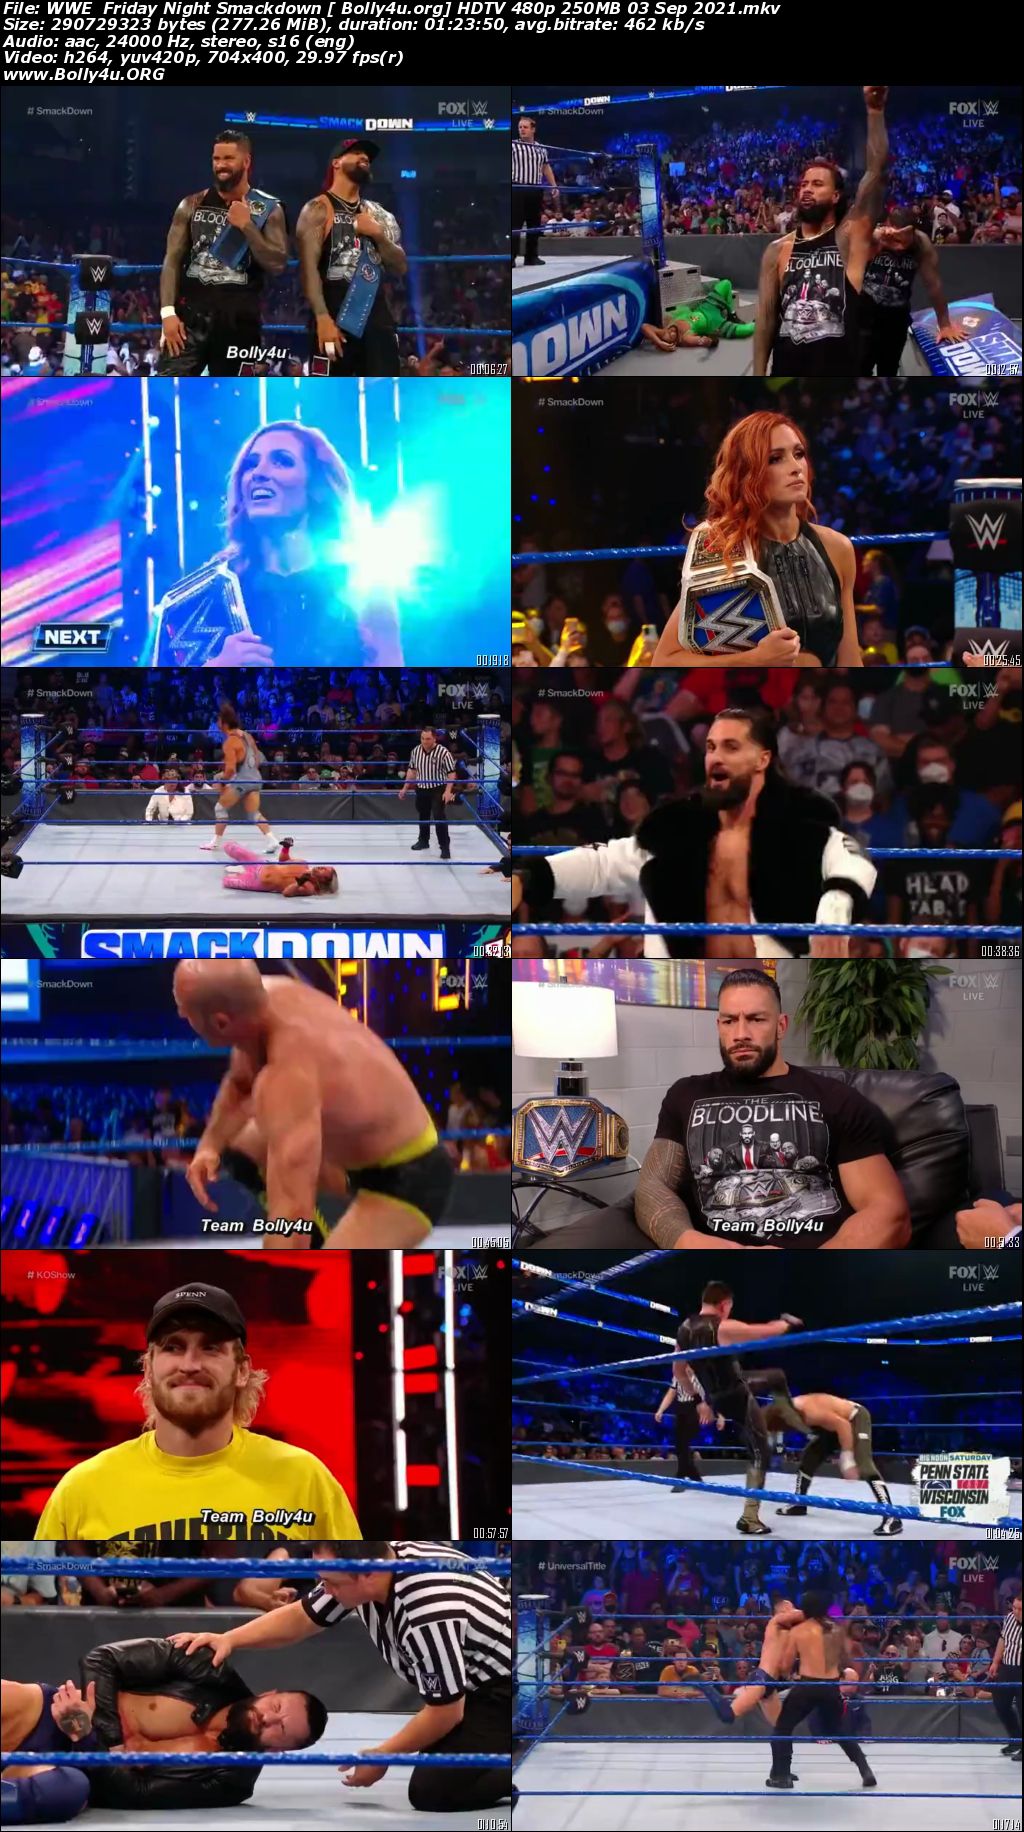 WWE  Friday Night Smackdown HDTV 480p 250MB 03 Sep 2021 Download